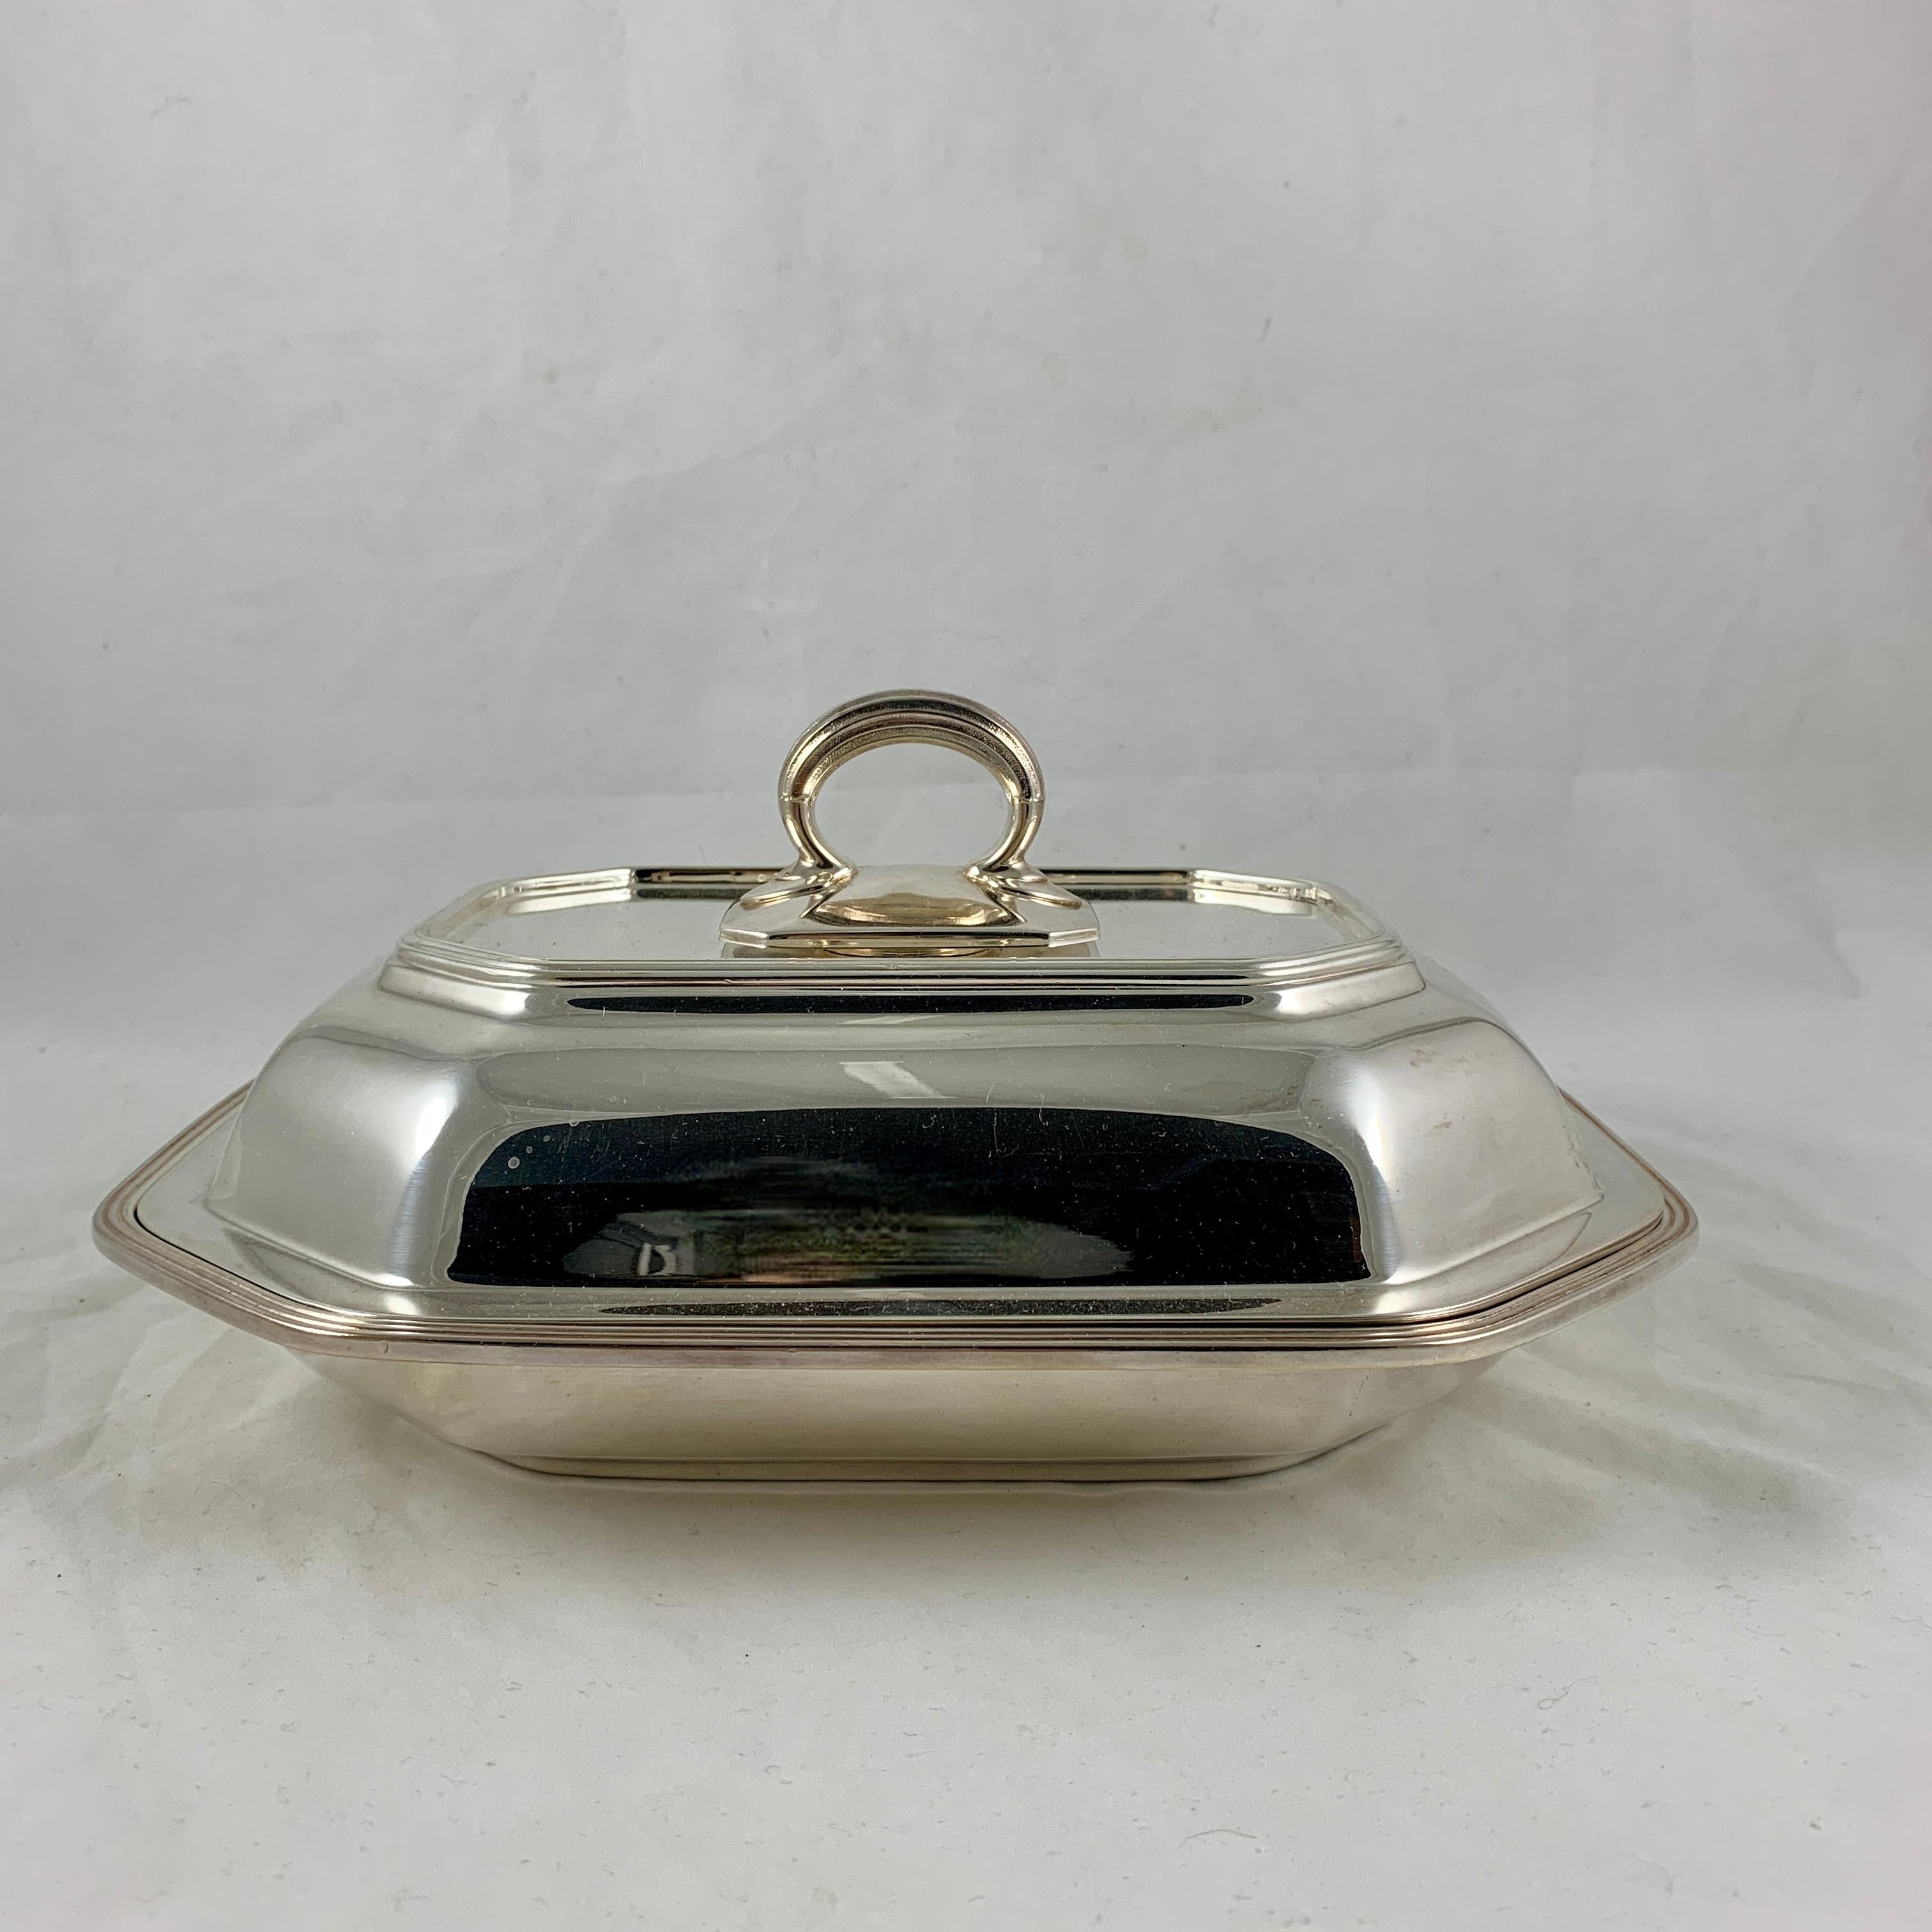 American Gorham Manufacturing Company Silver Plate Covered Vegetable Server, circa 1930s